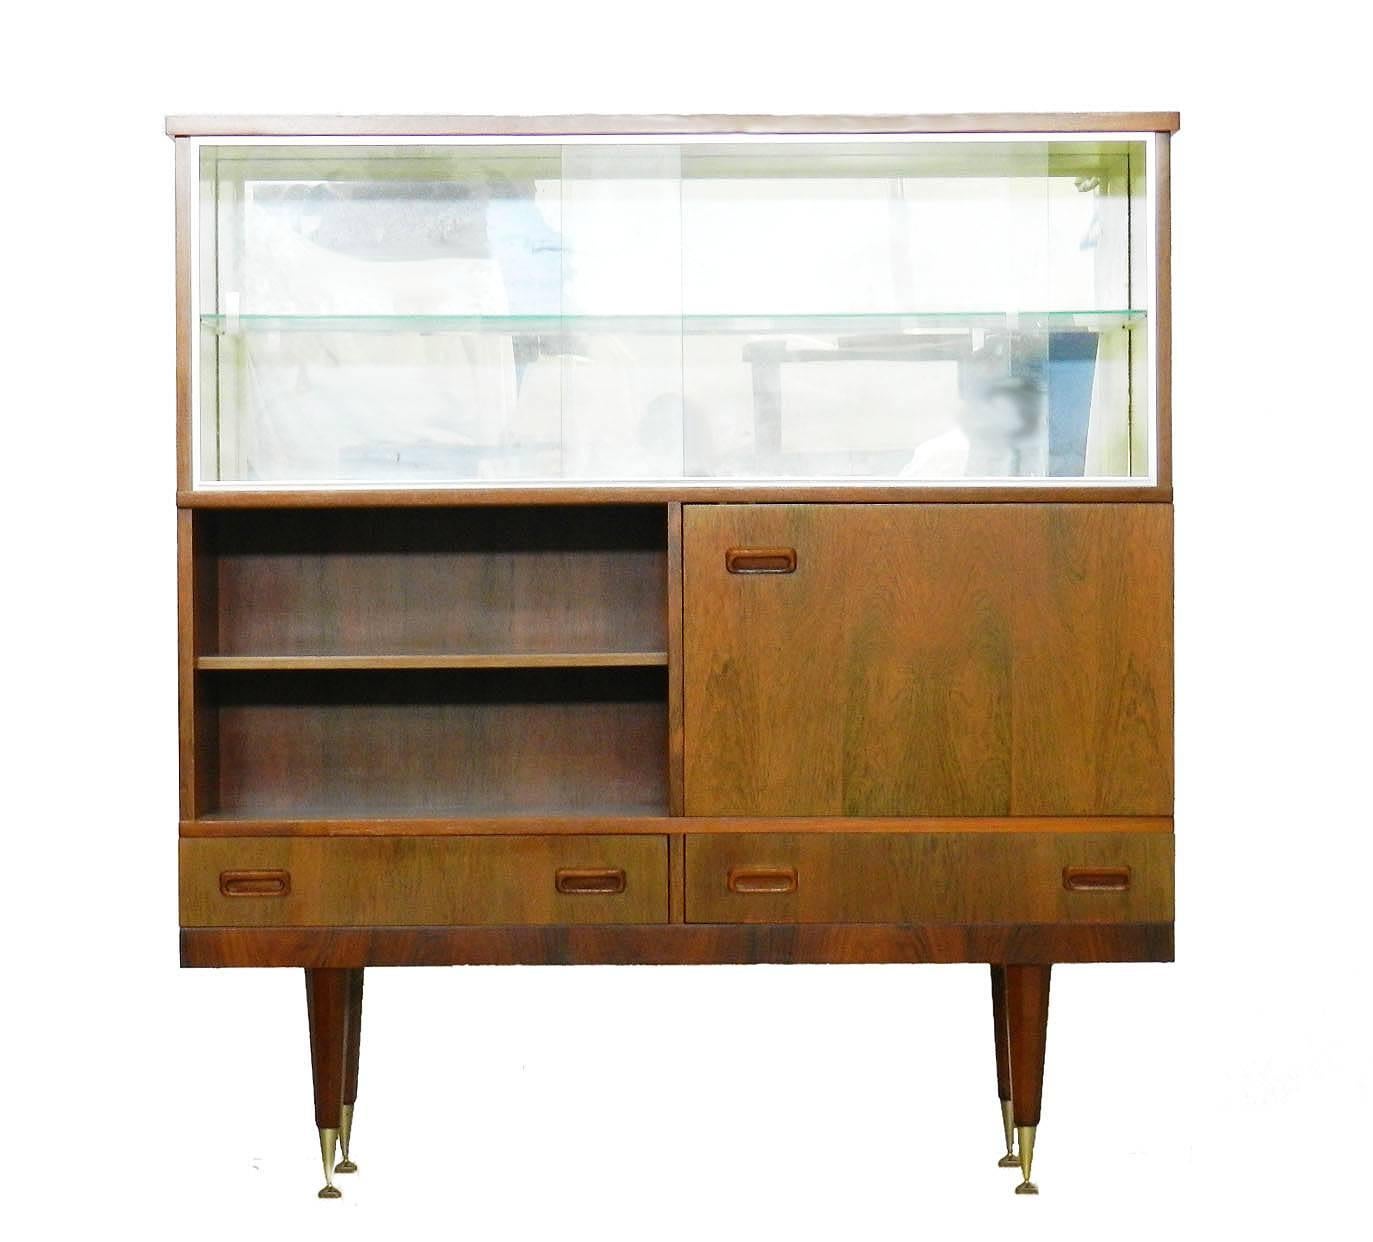 Midcentury vitrine cabinet showcase Scandinavian style
Two drawers
Shelves
Cupboard
Sliding glass display vitrine
Very good vintage condition for its age.
Free Shipping Options available 
We will always do our best to offer free shipping or at the